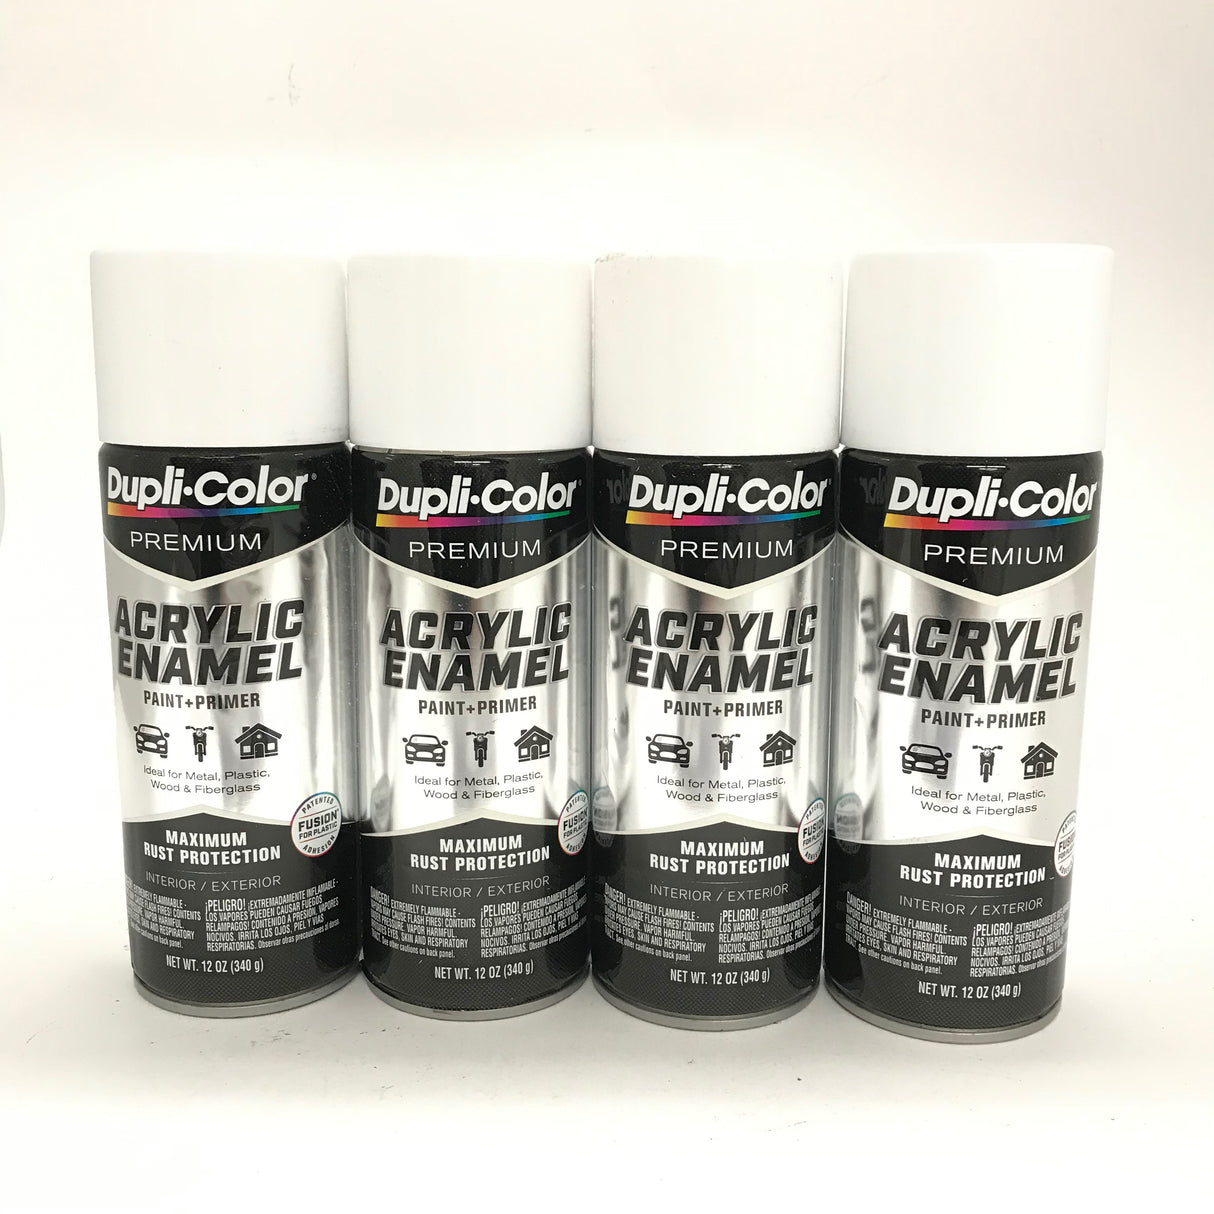 Duplicolor PAE110-4 PACK GLOSS WHITE Premium Acrylic Enamel -Max Rust Protection - 12 OZ